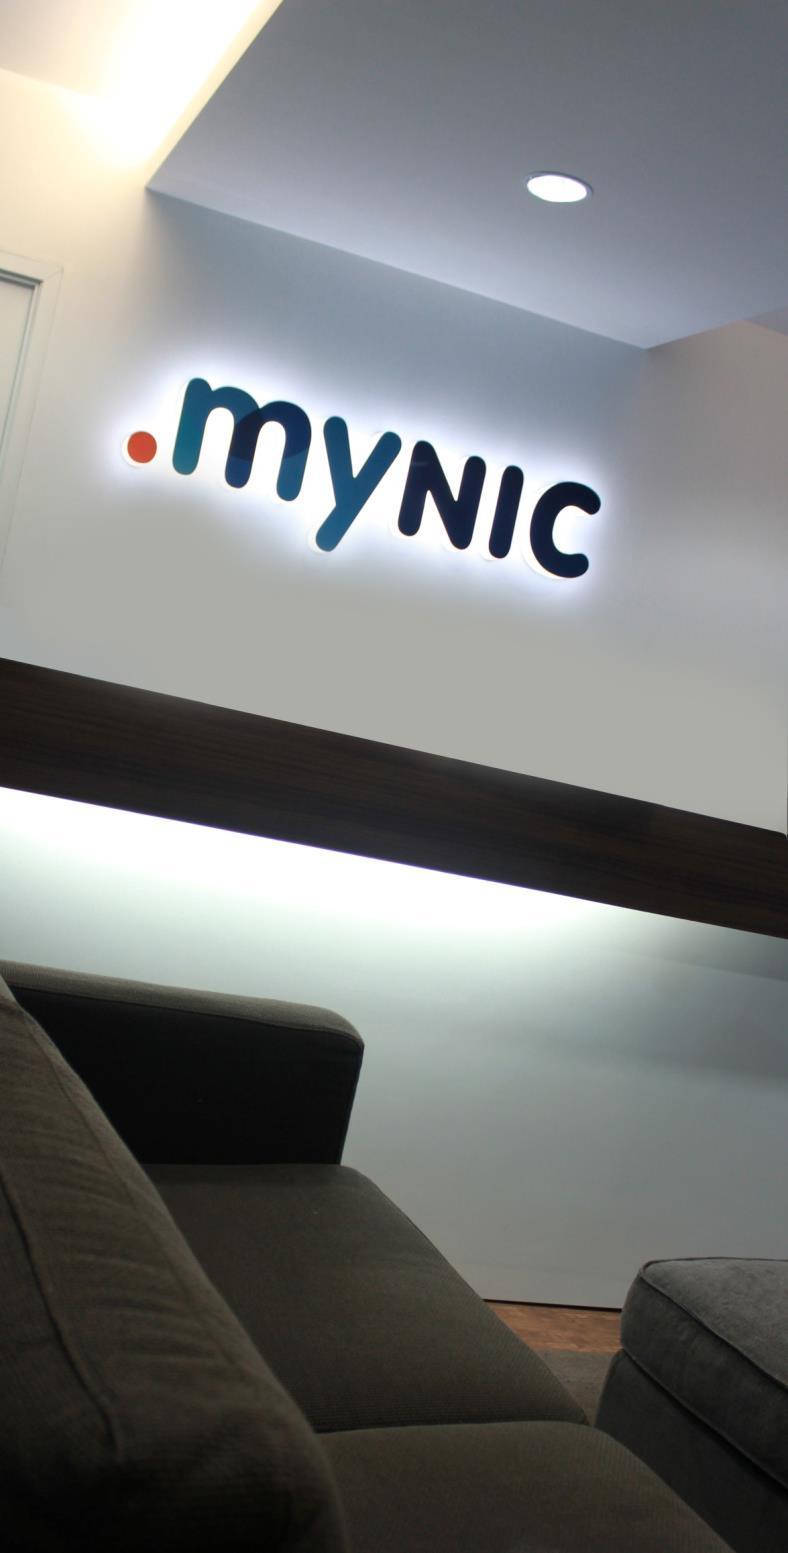 At a Glance MYNIC Berhad is an agency under Ministry of Communications & Multimedia Malaysia (KKMM) and regulated by Malaysian